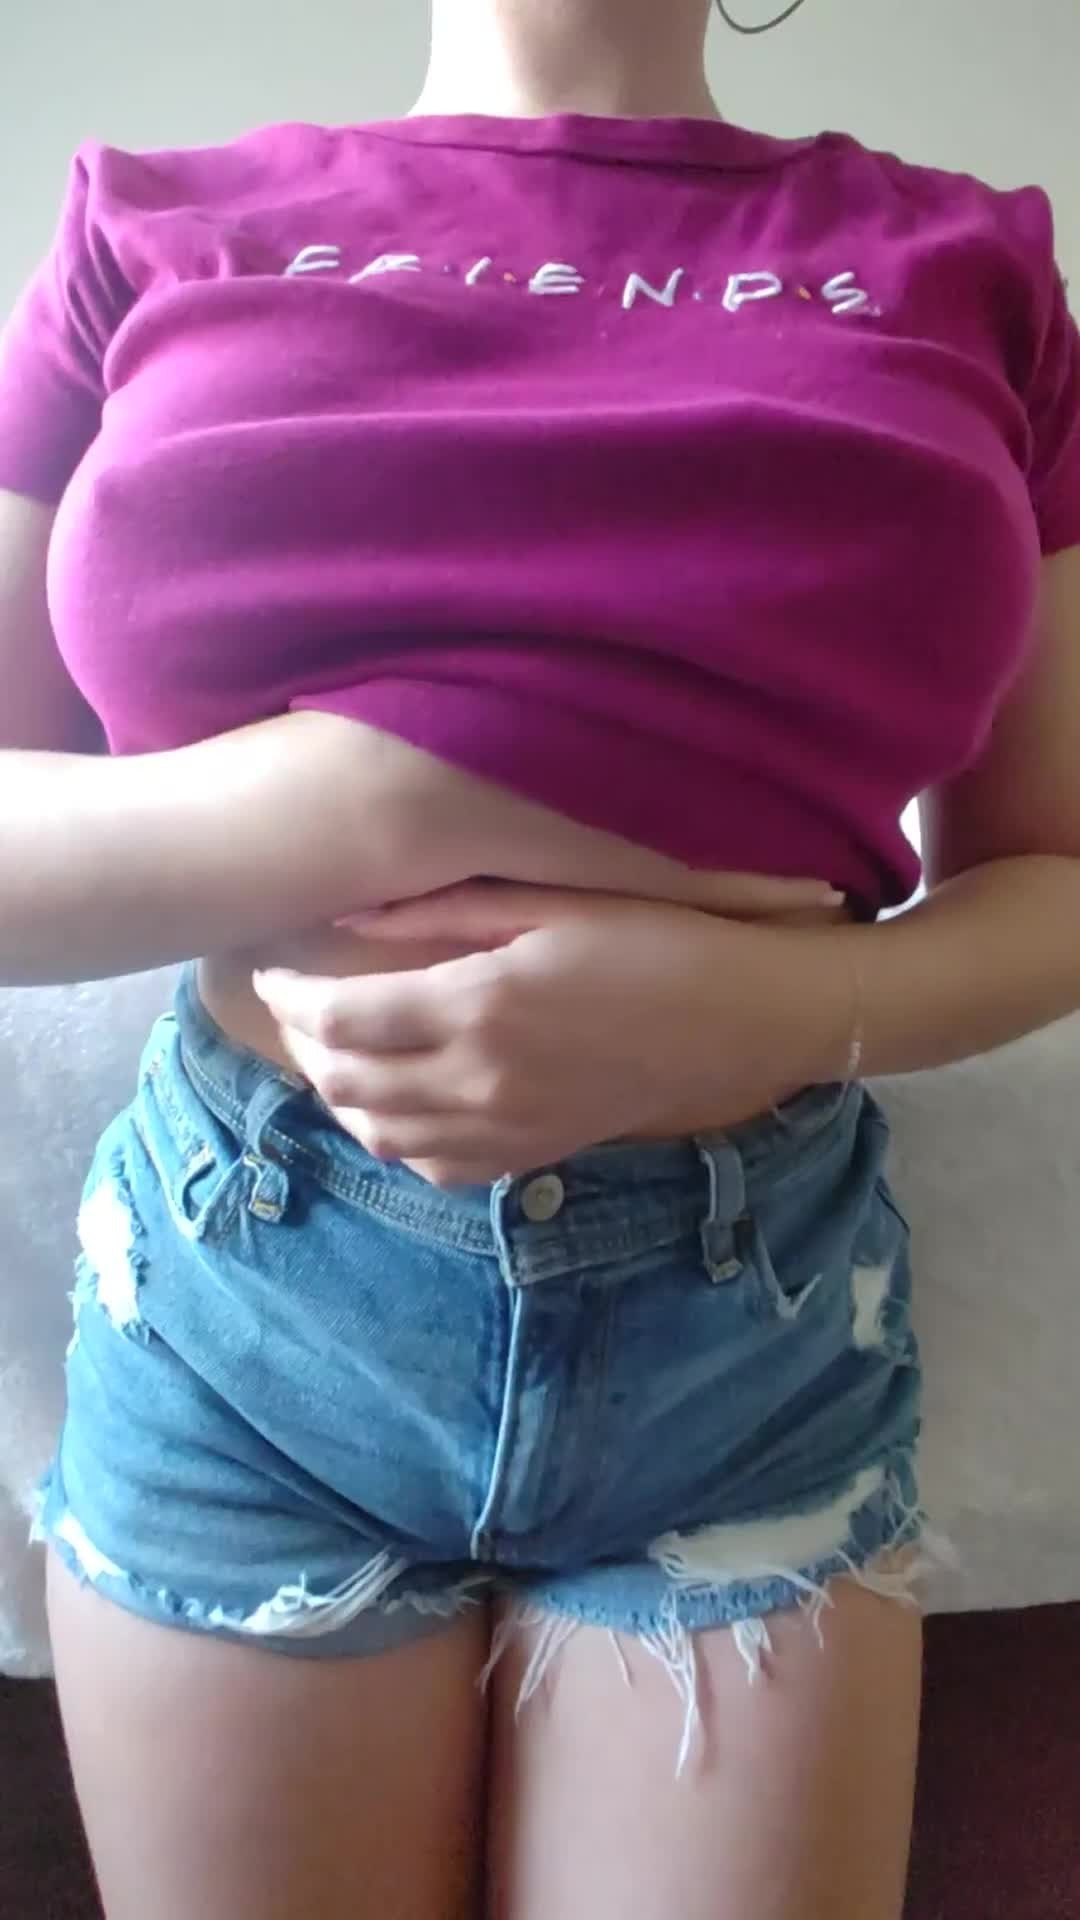 Video post by DirtyVeronica